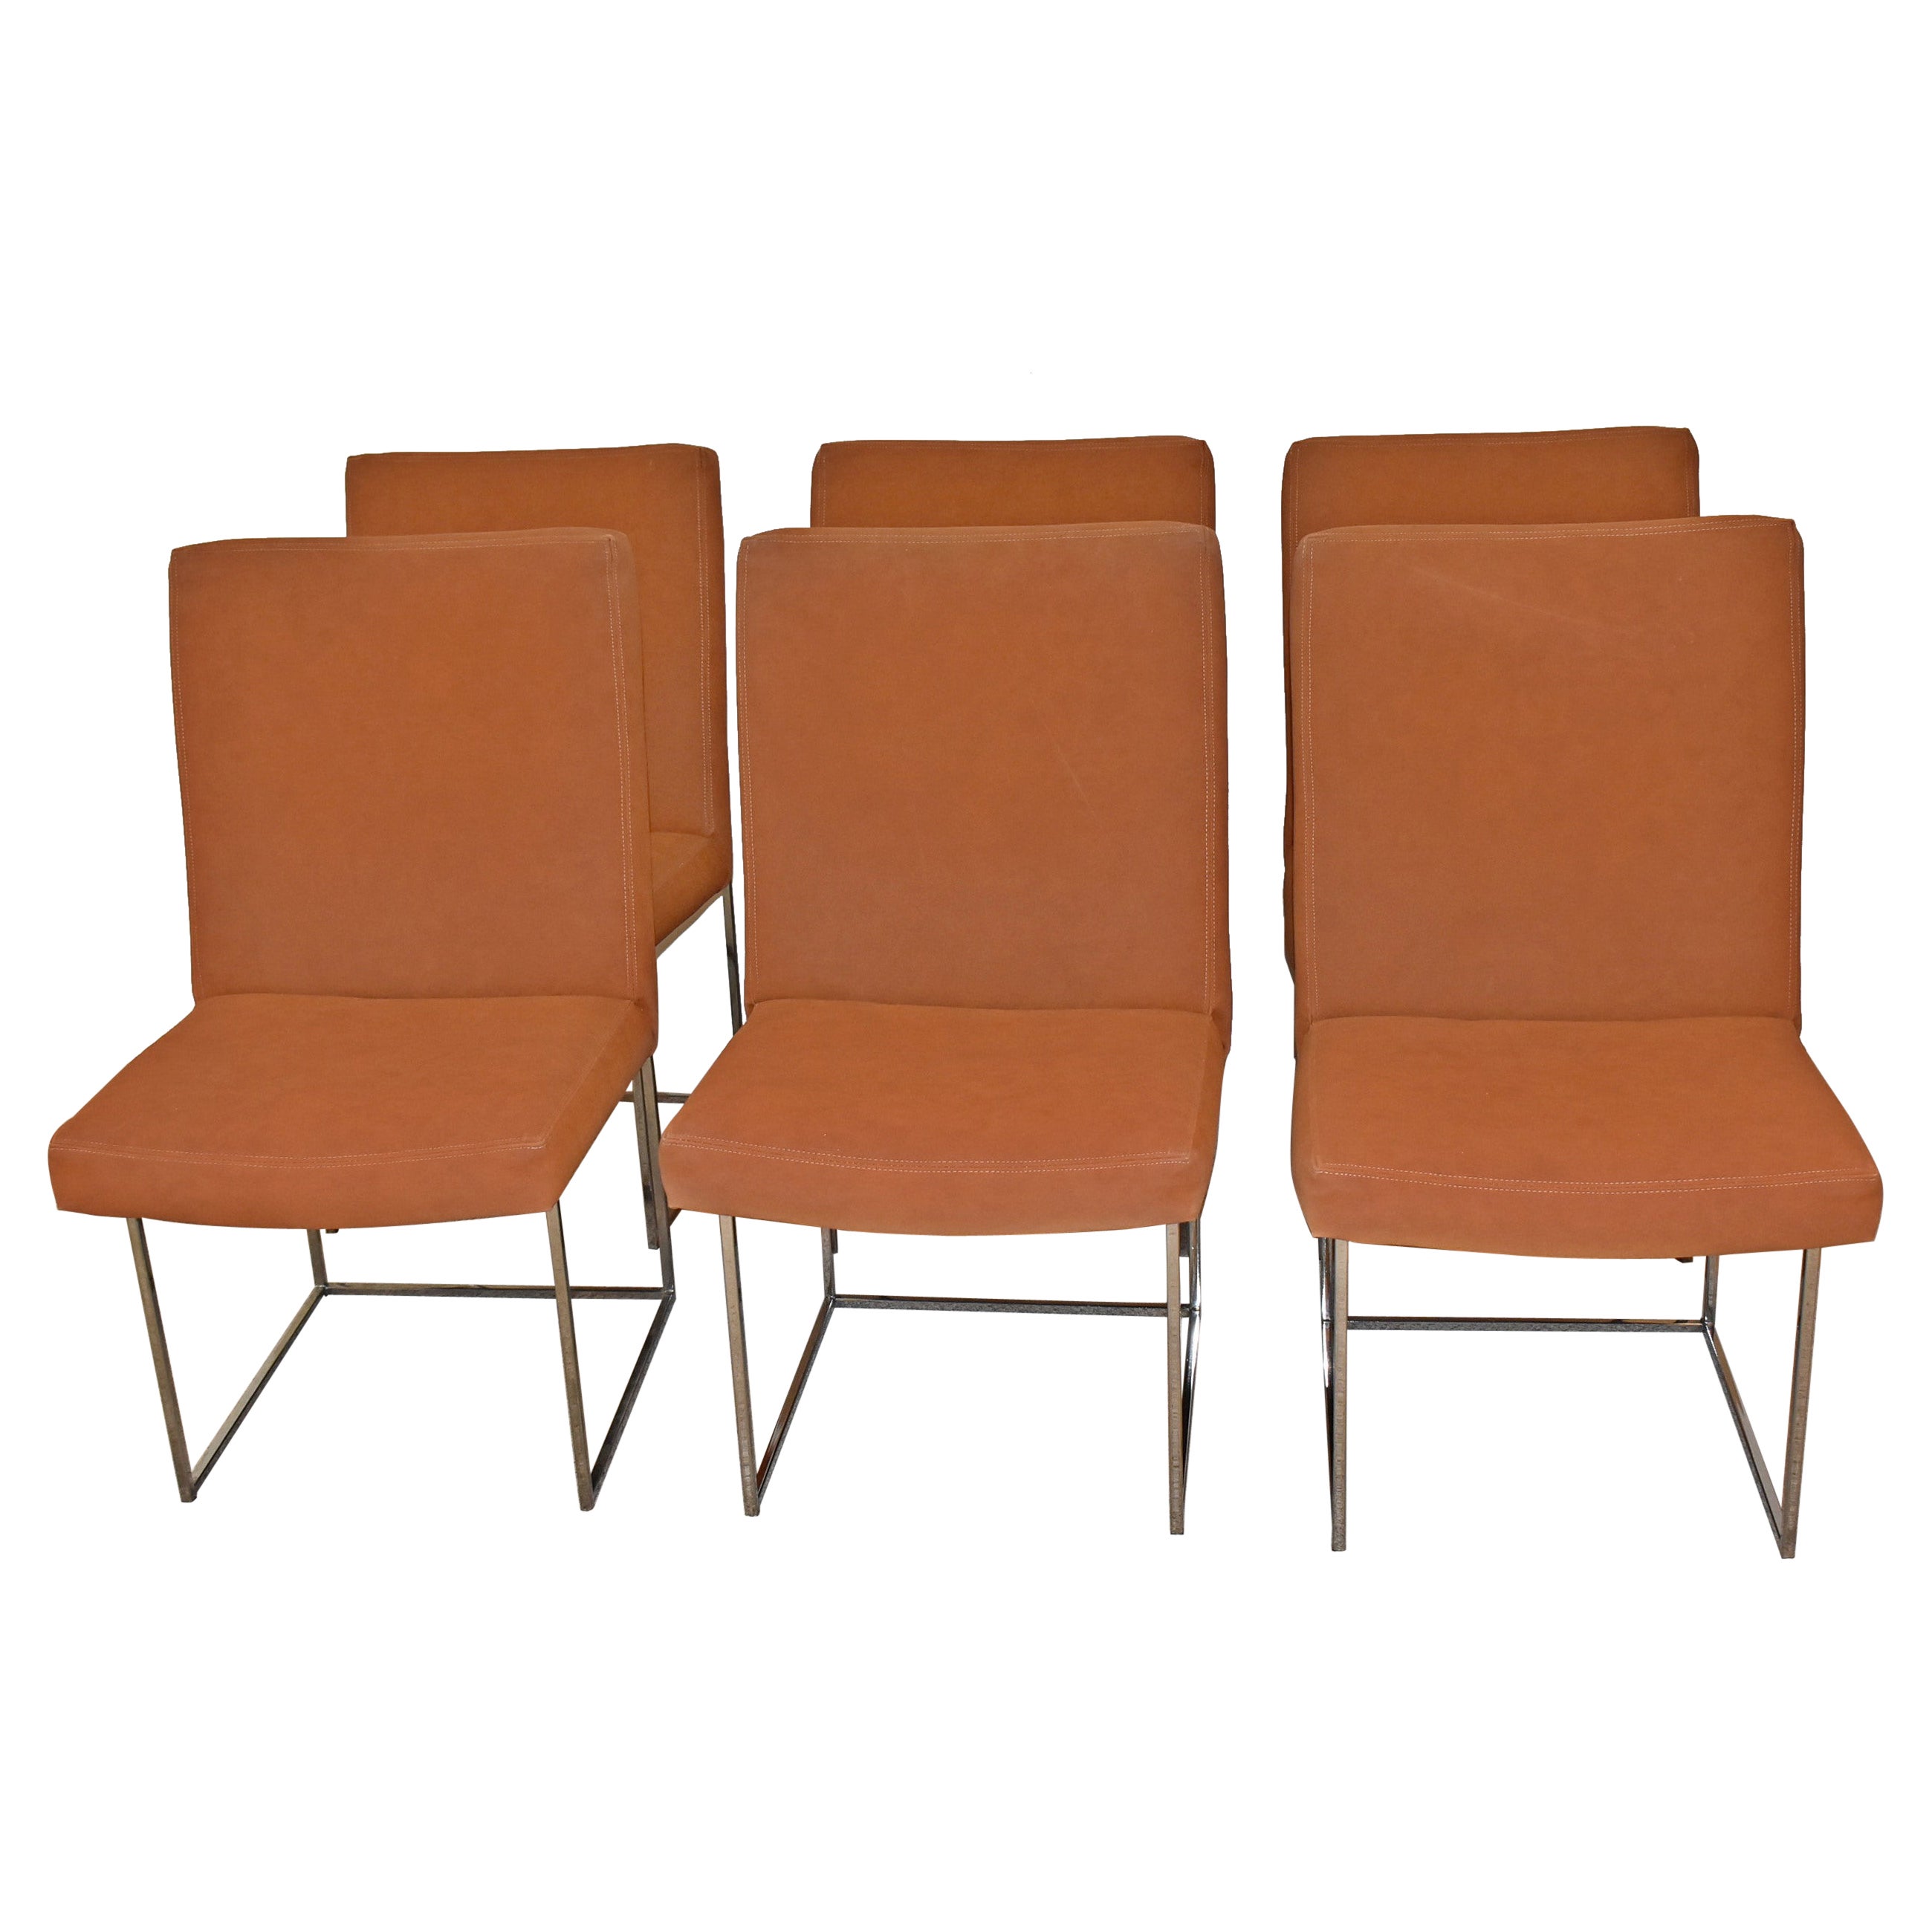 Six Thayer Coggin Chrome Dining Room Chairs Designed by Milo Baughman For Sale